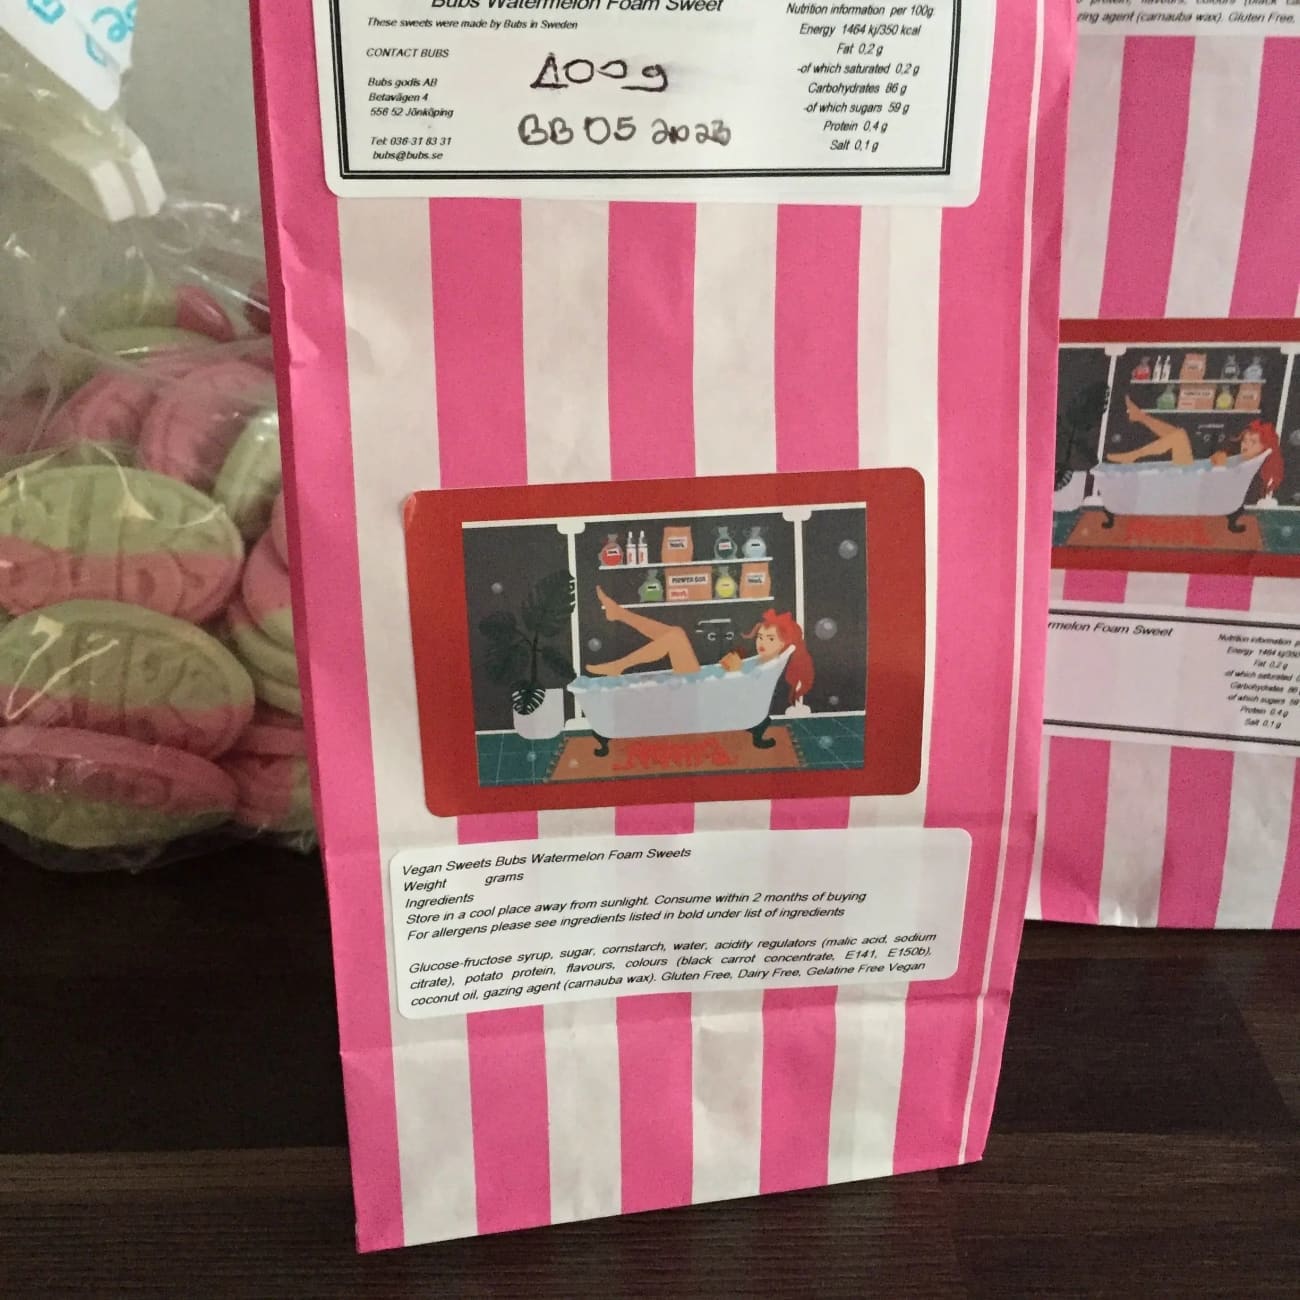 Choose to have your sweets sent out in a Sweet Bag colour of sweet bag may be different to photo Rock Chocs 